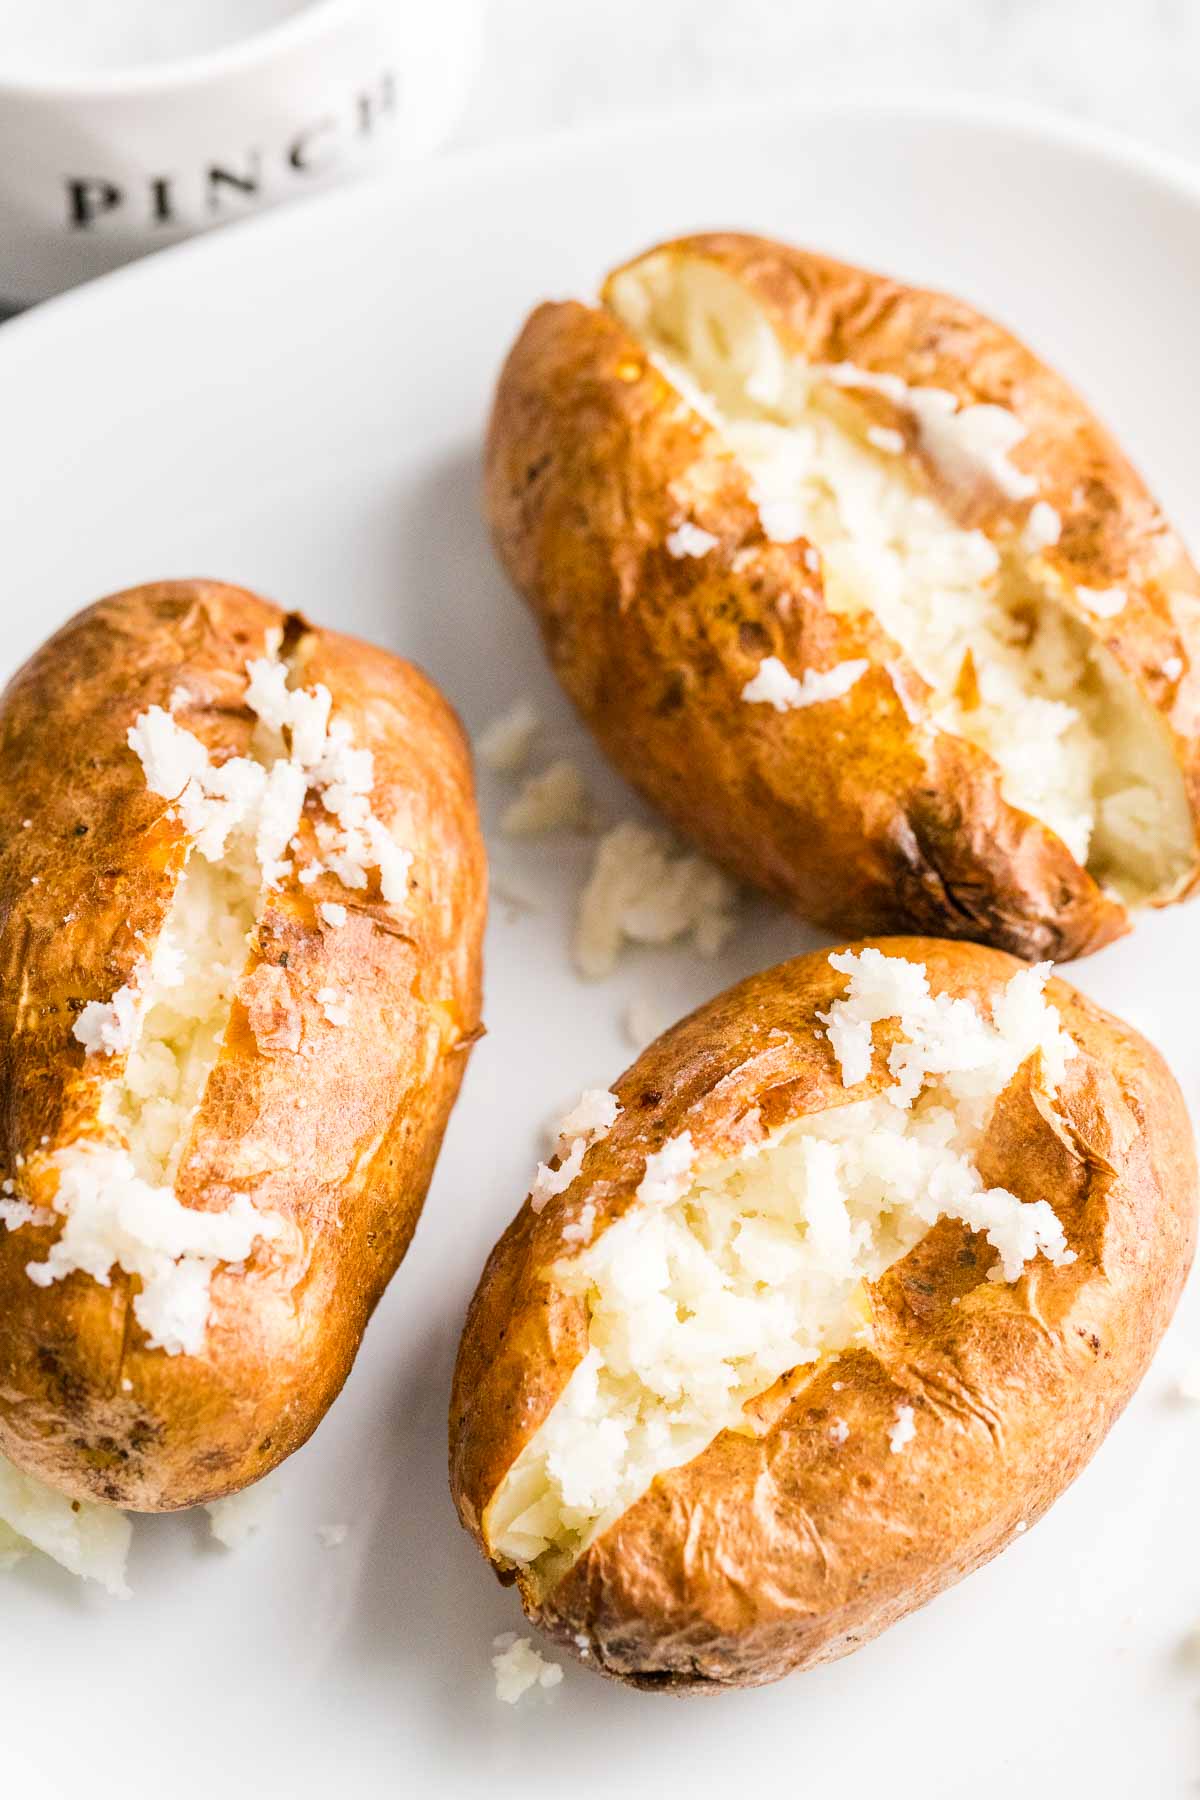 Baked potatoes cut open and fluffed with a fork on a white plate